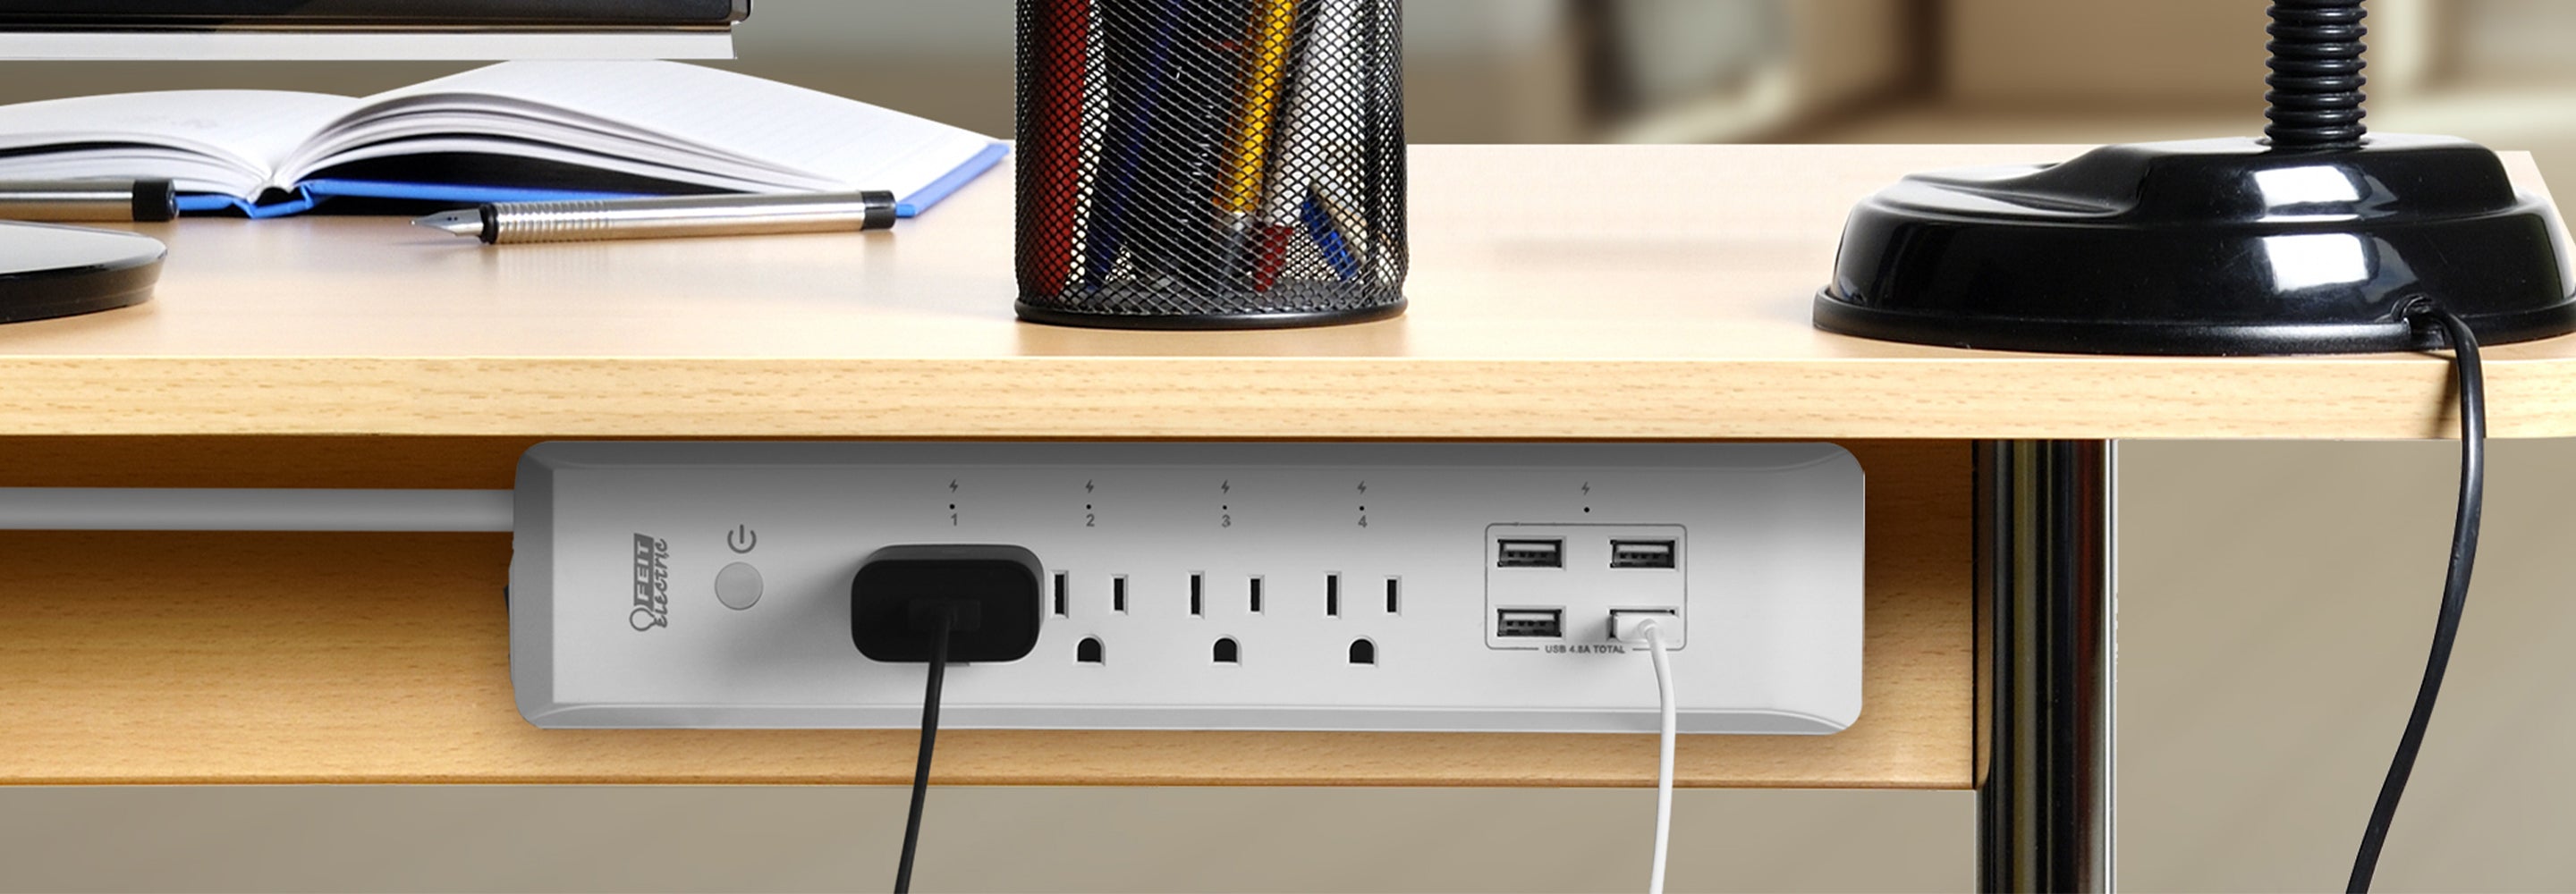 Feit Electric Wall Receptacle with USB Ports 